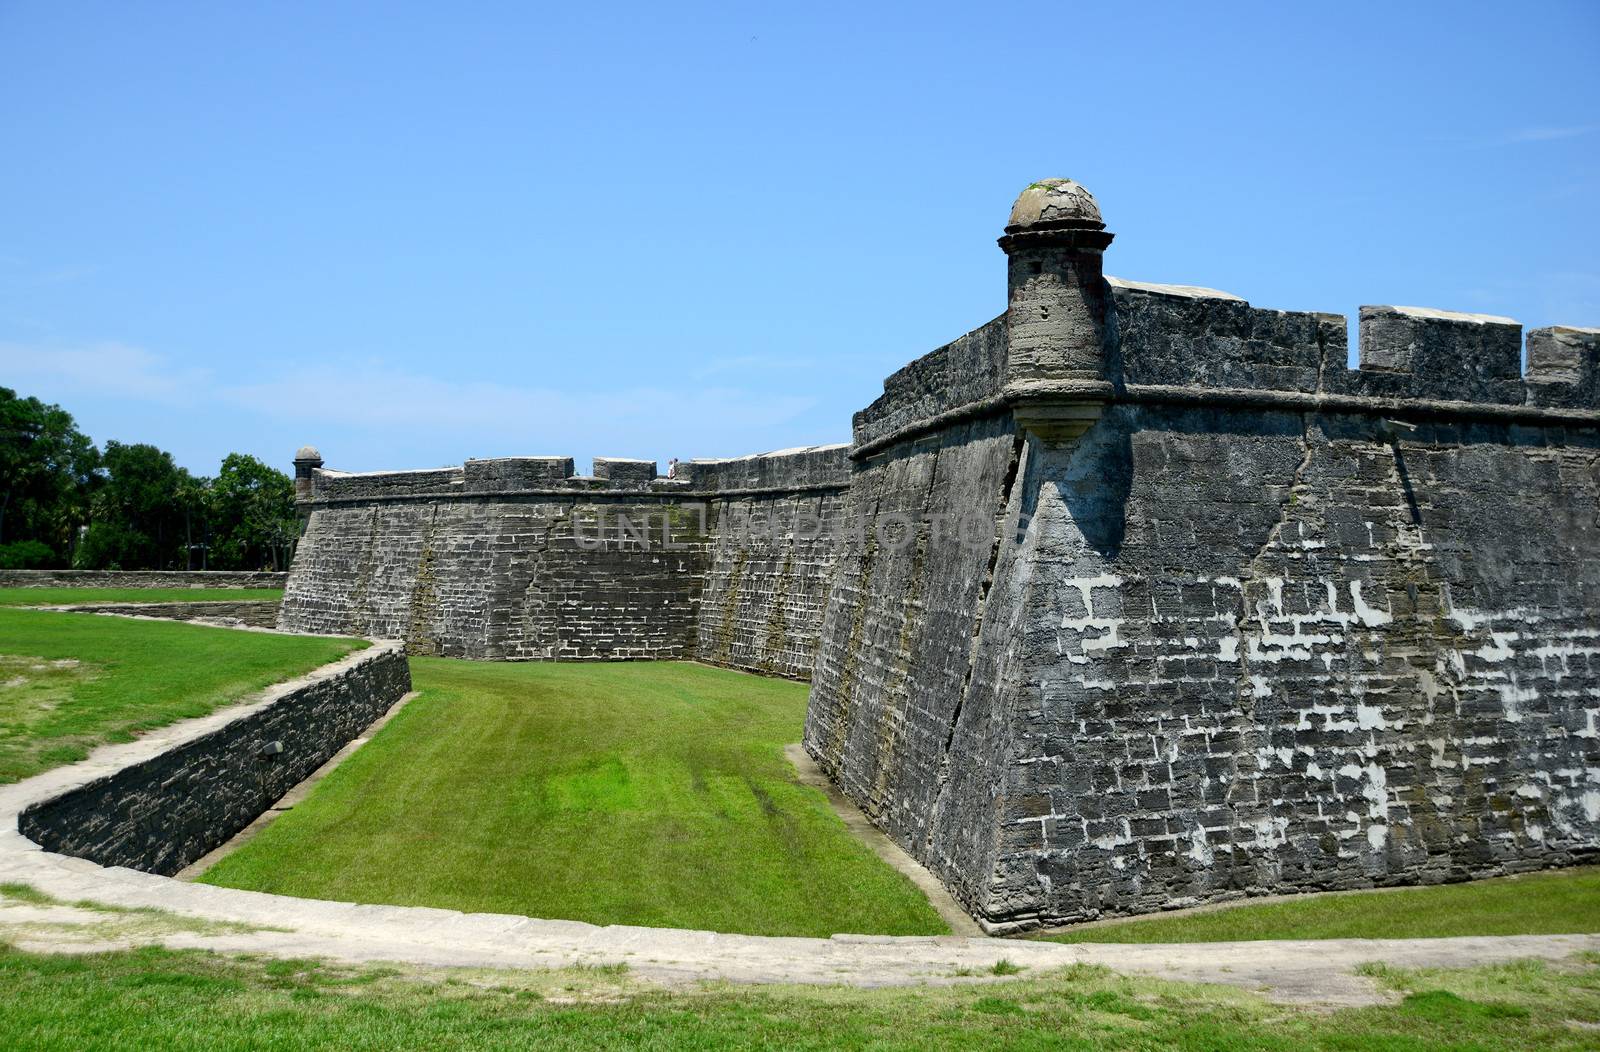 lookout tower and bastion at Castillo de San Marcos fort